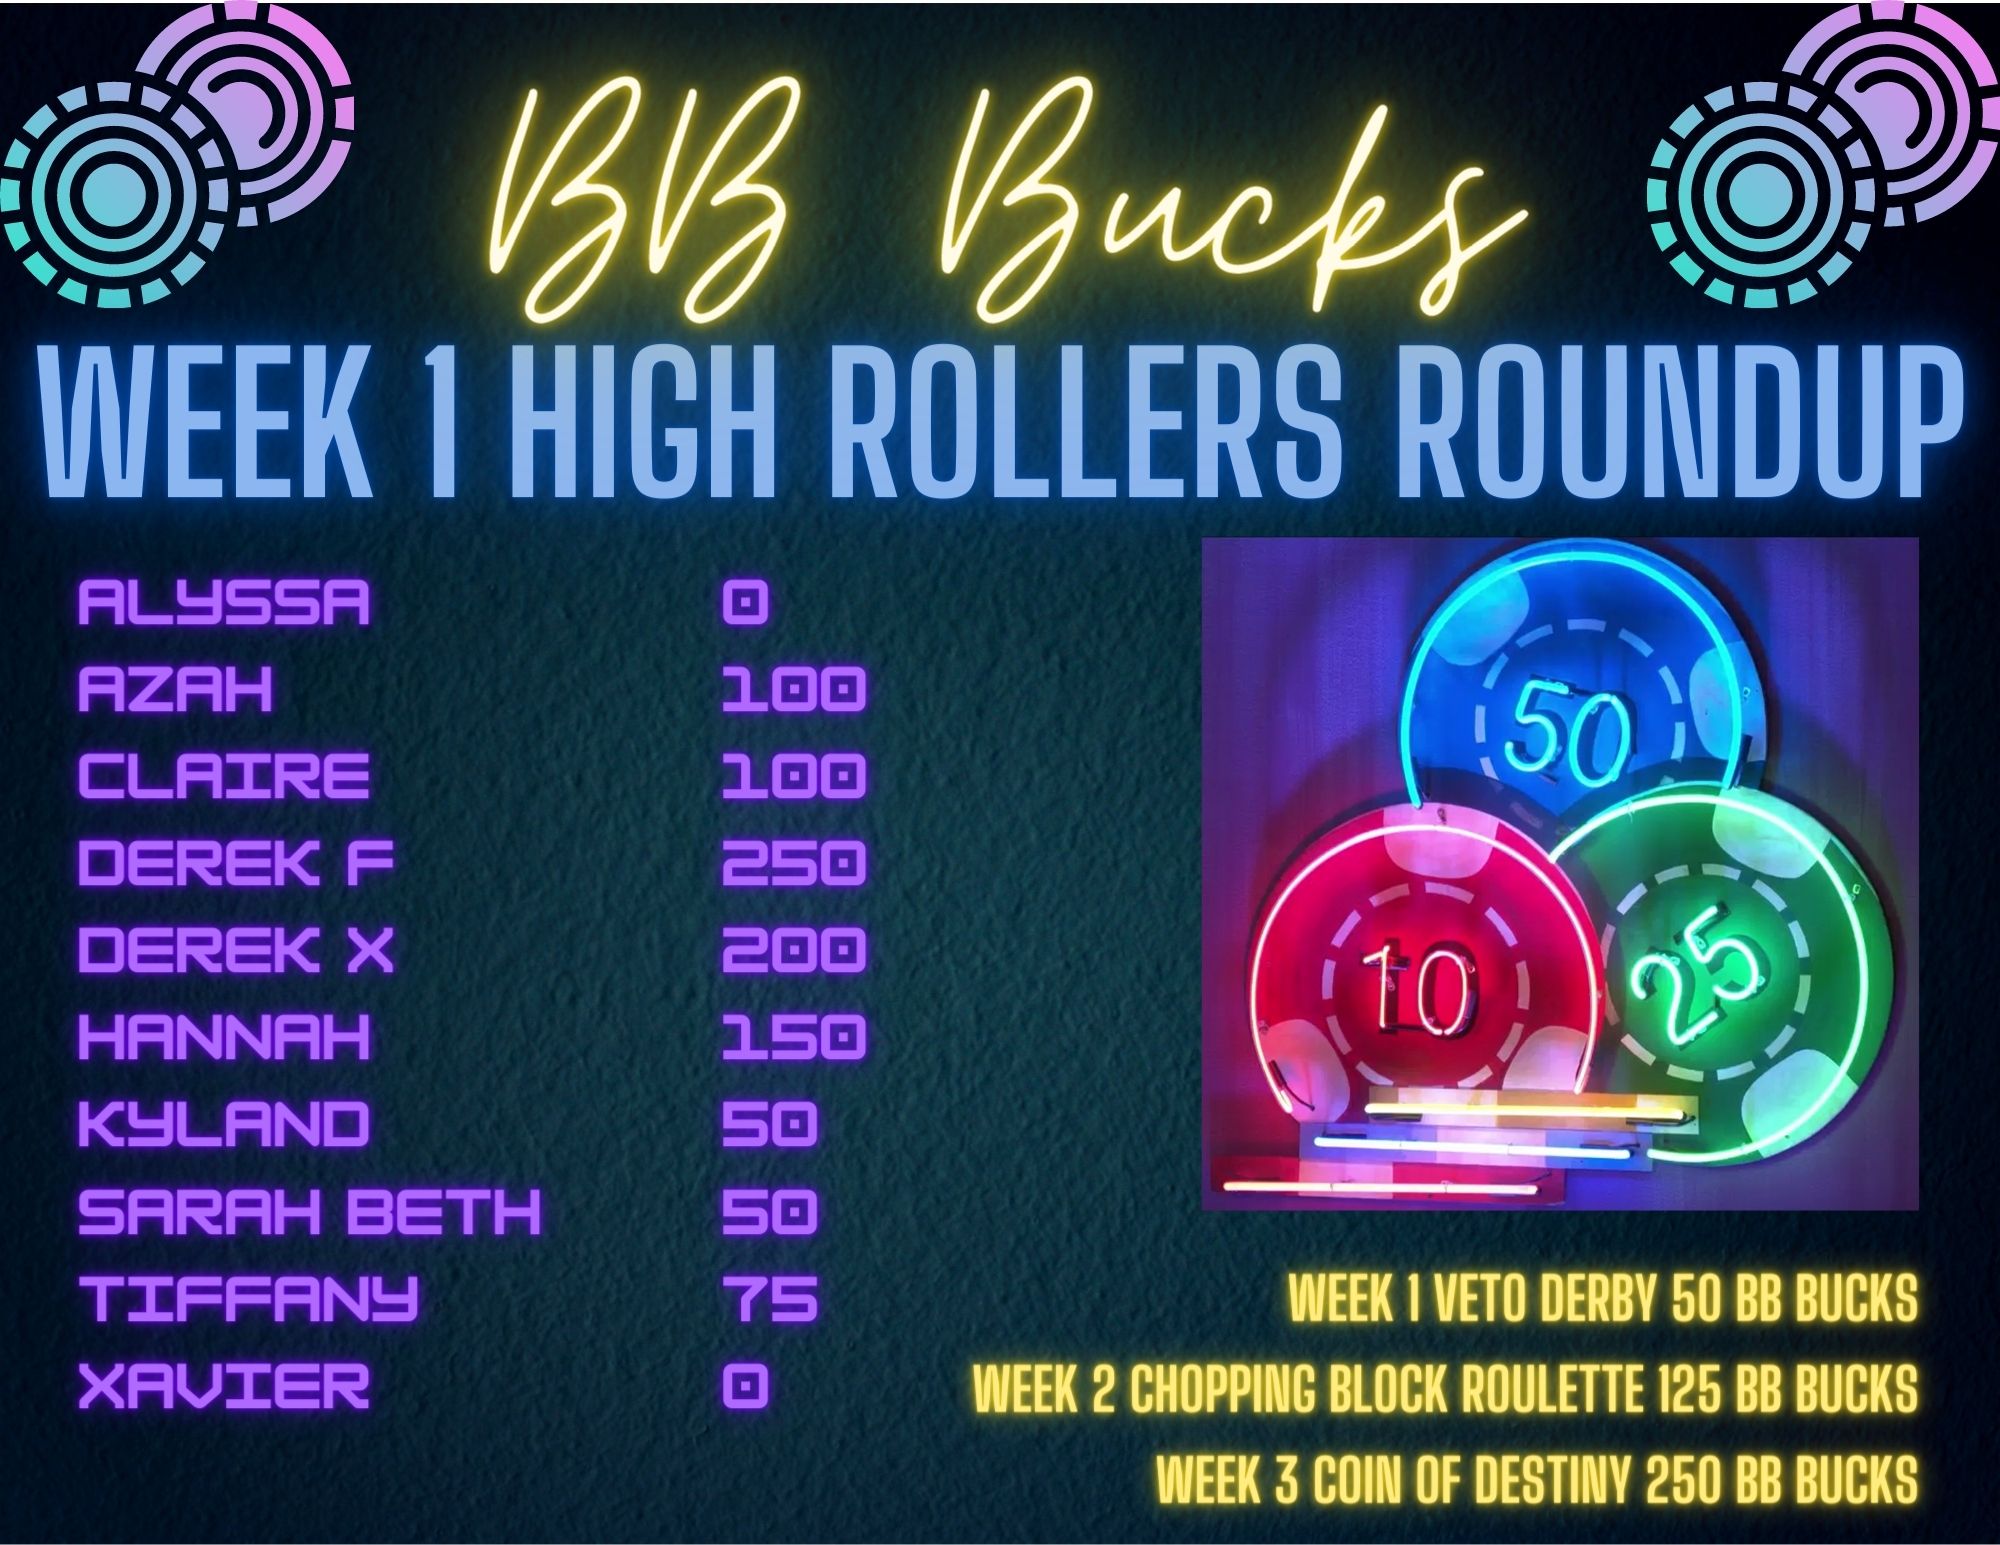 High rollers roundup wk 22 Big Brother Access